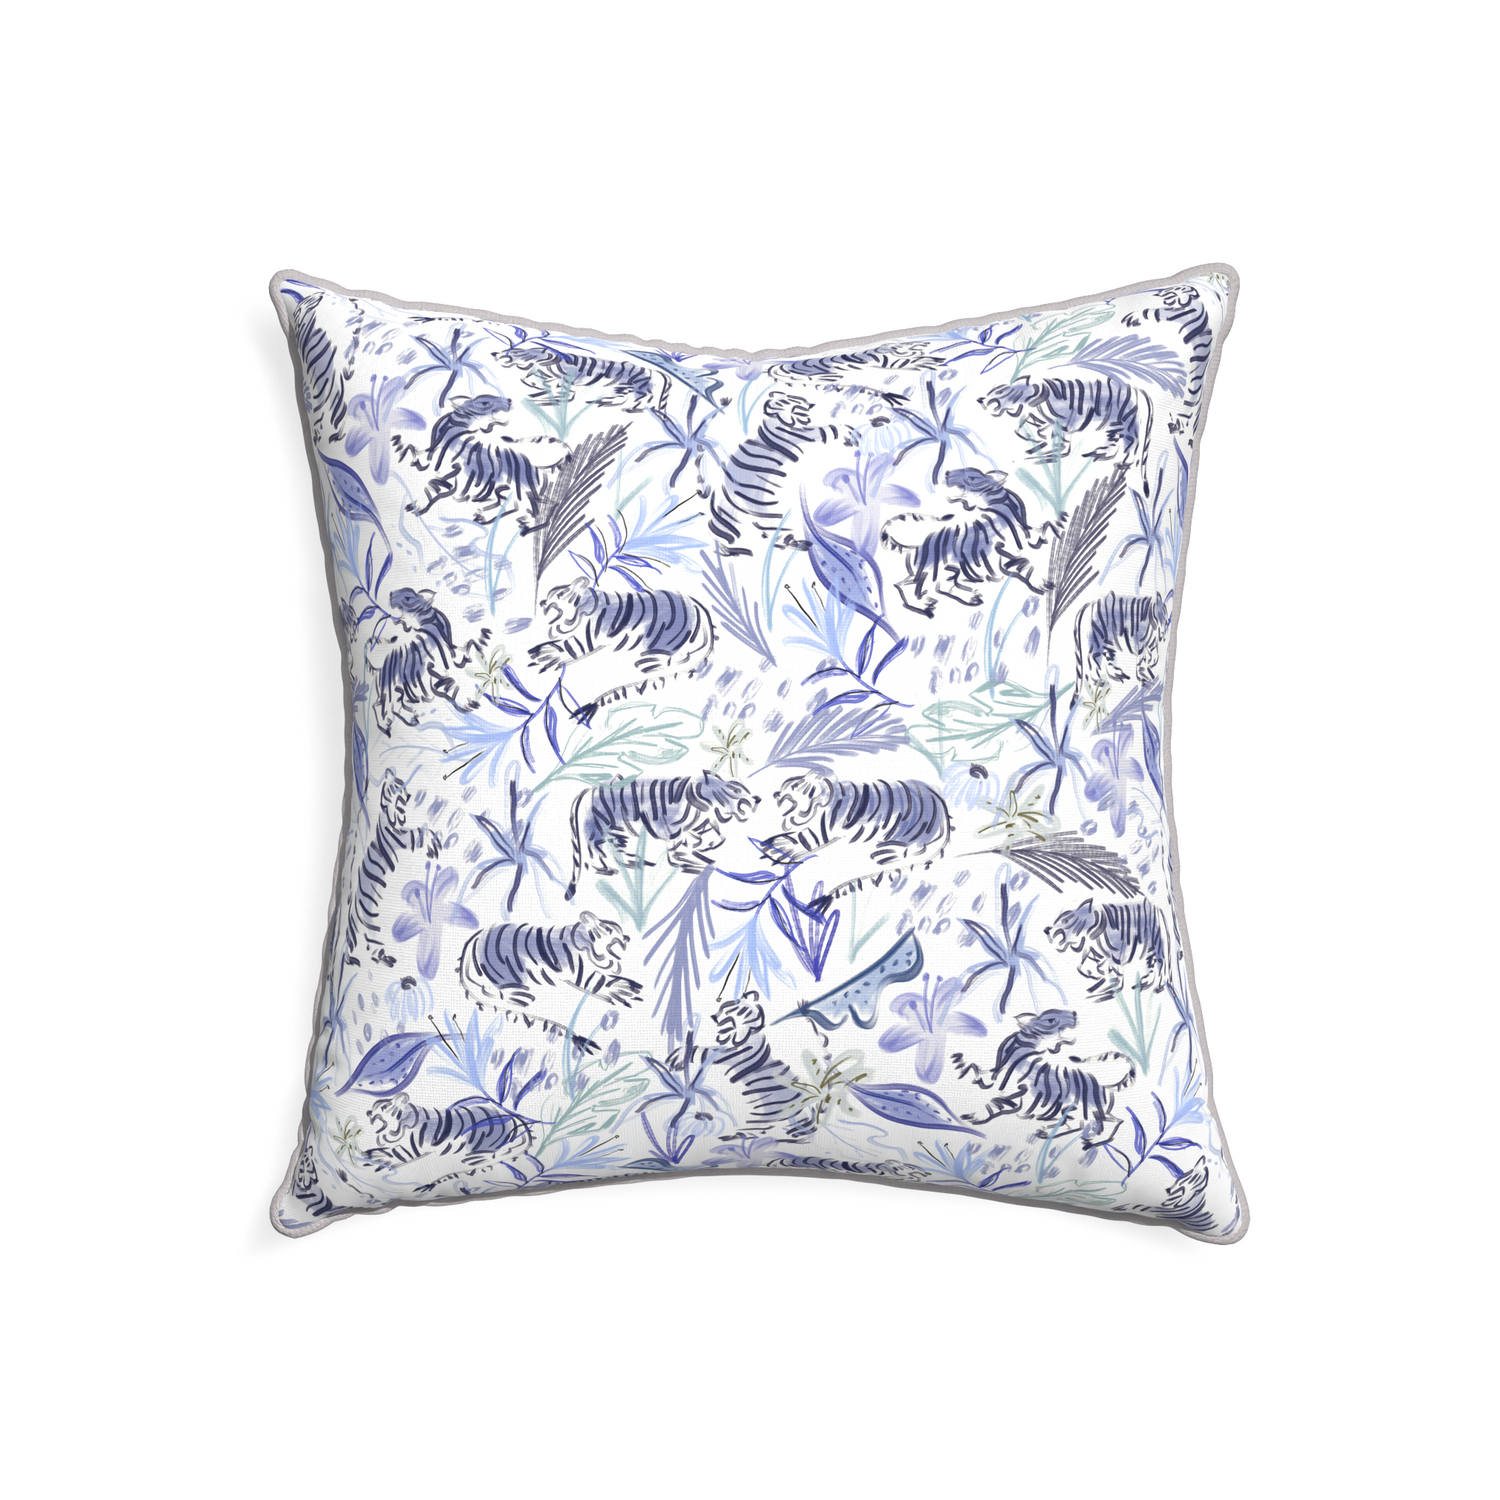 22-square frida blue custom blue with intricate tiger designpillow with pebble piping on white background